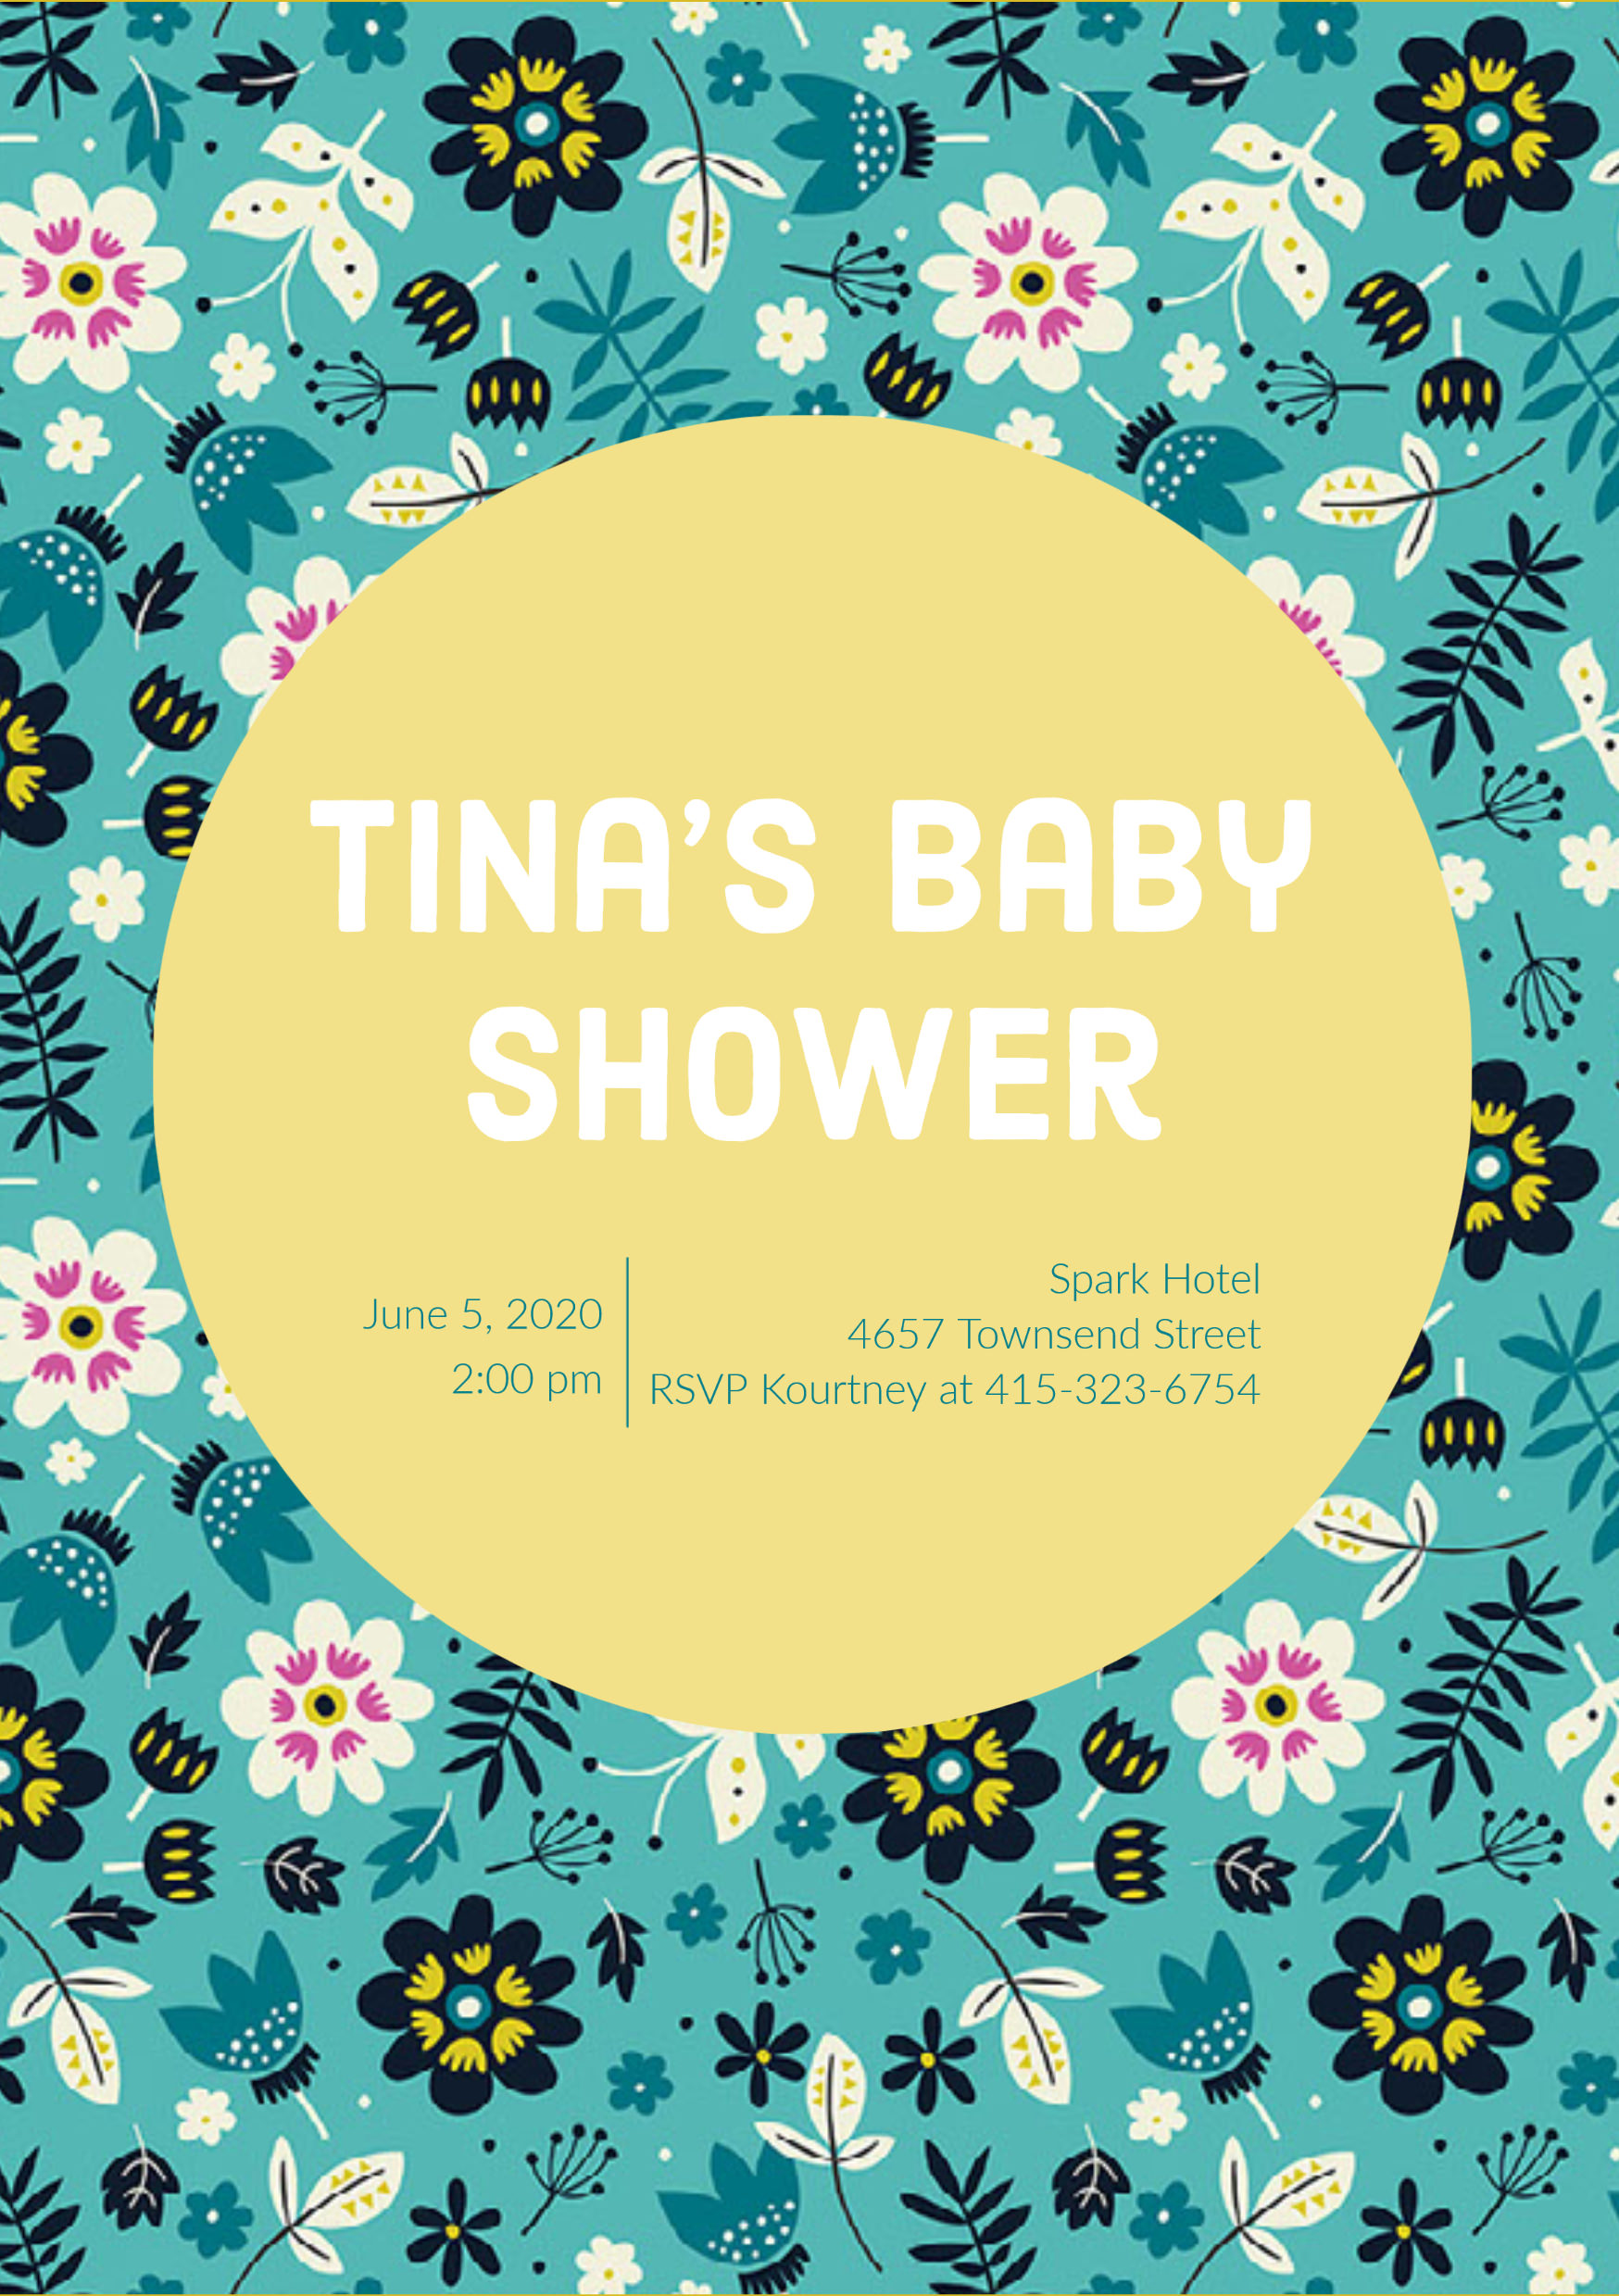 free download baby shower invitation templates word